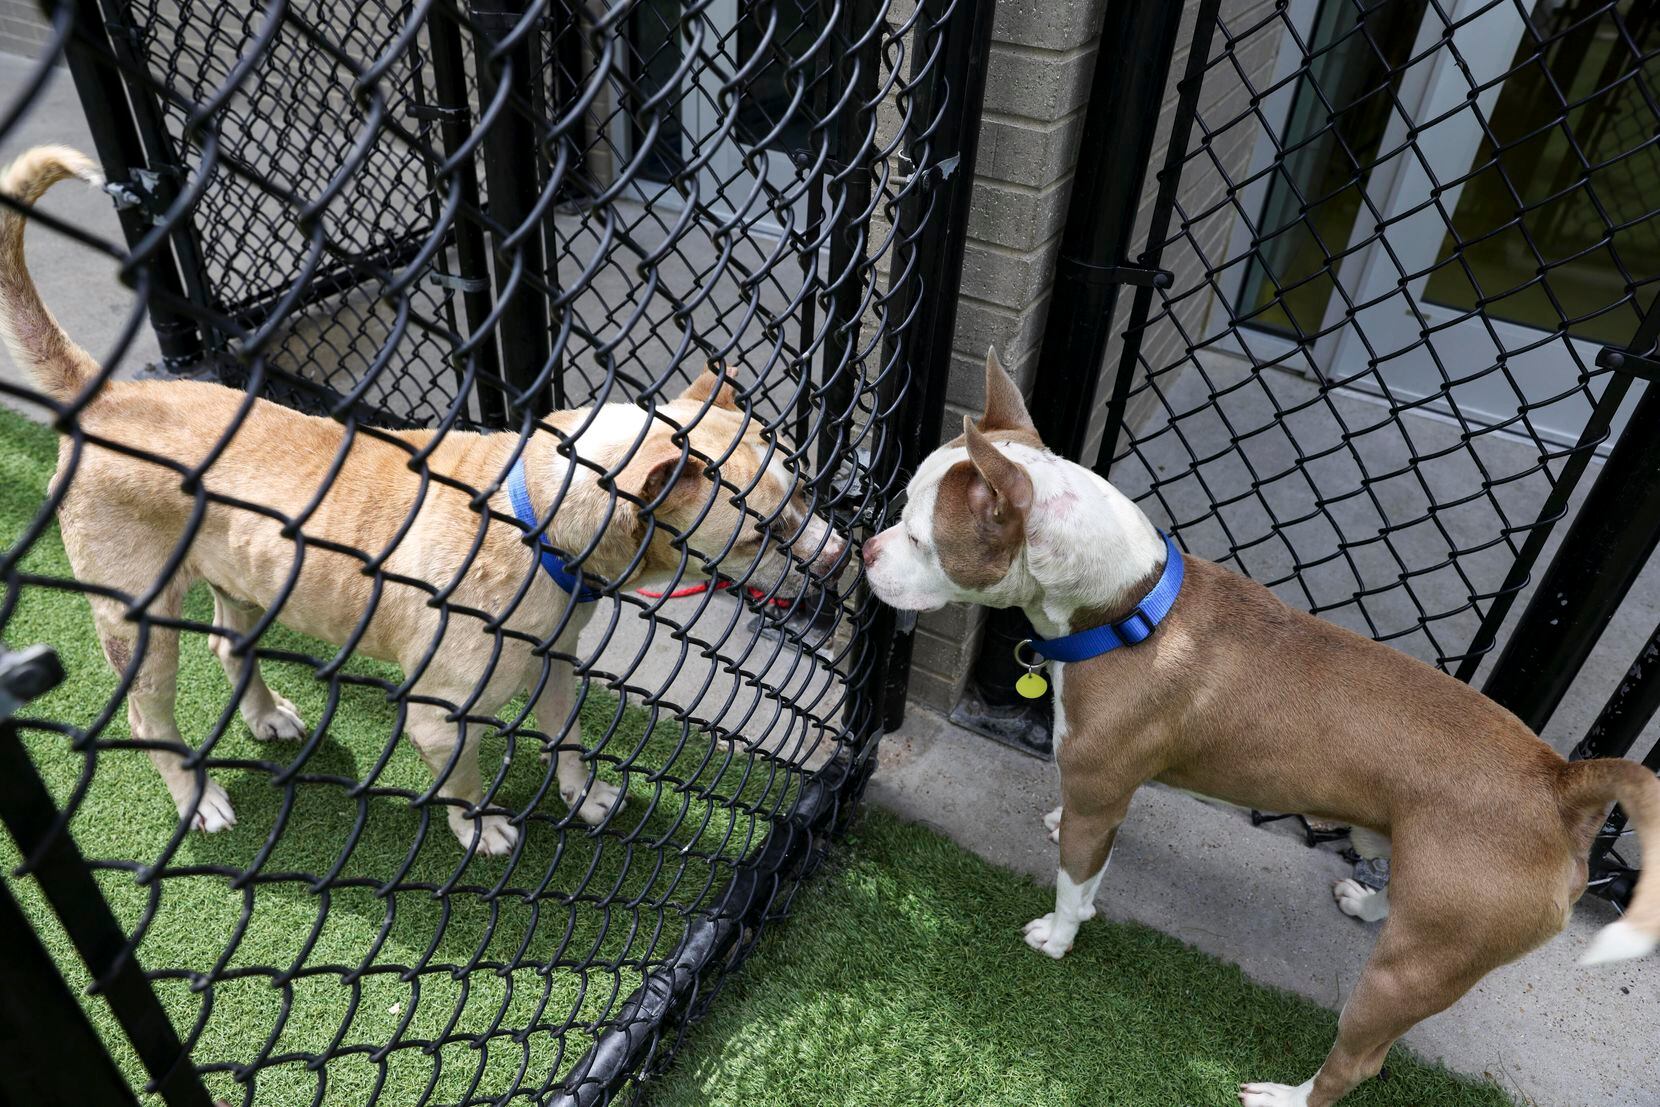 Wiggles comes face to face with another dog at the shelter on Wednesday, June 15, 2022. The...